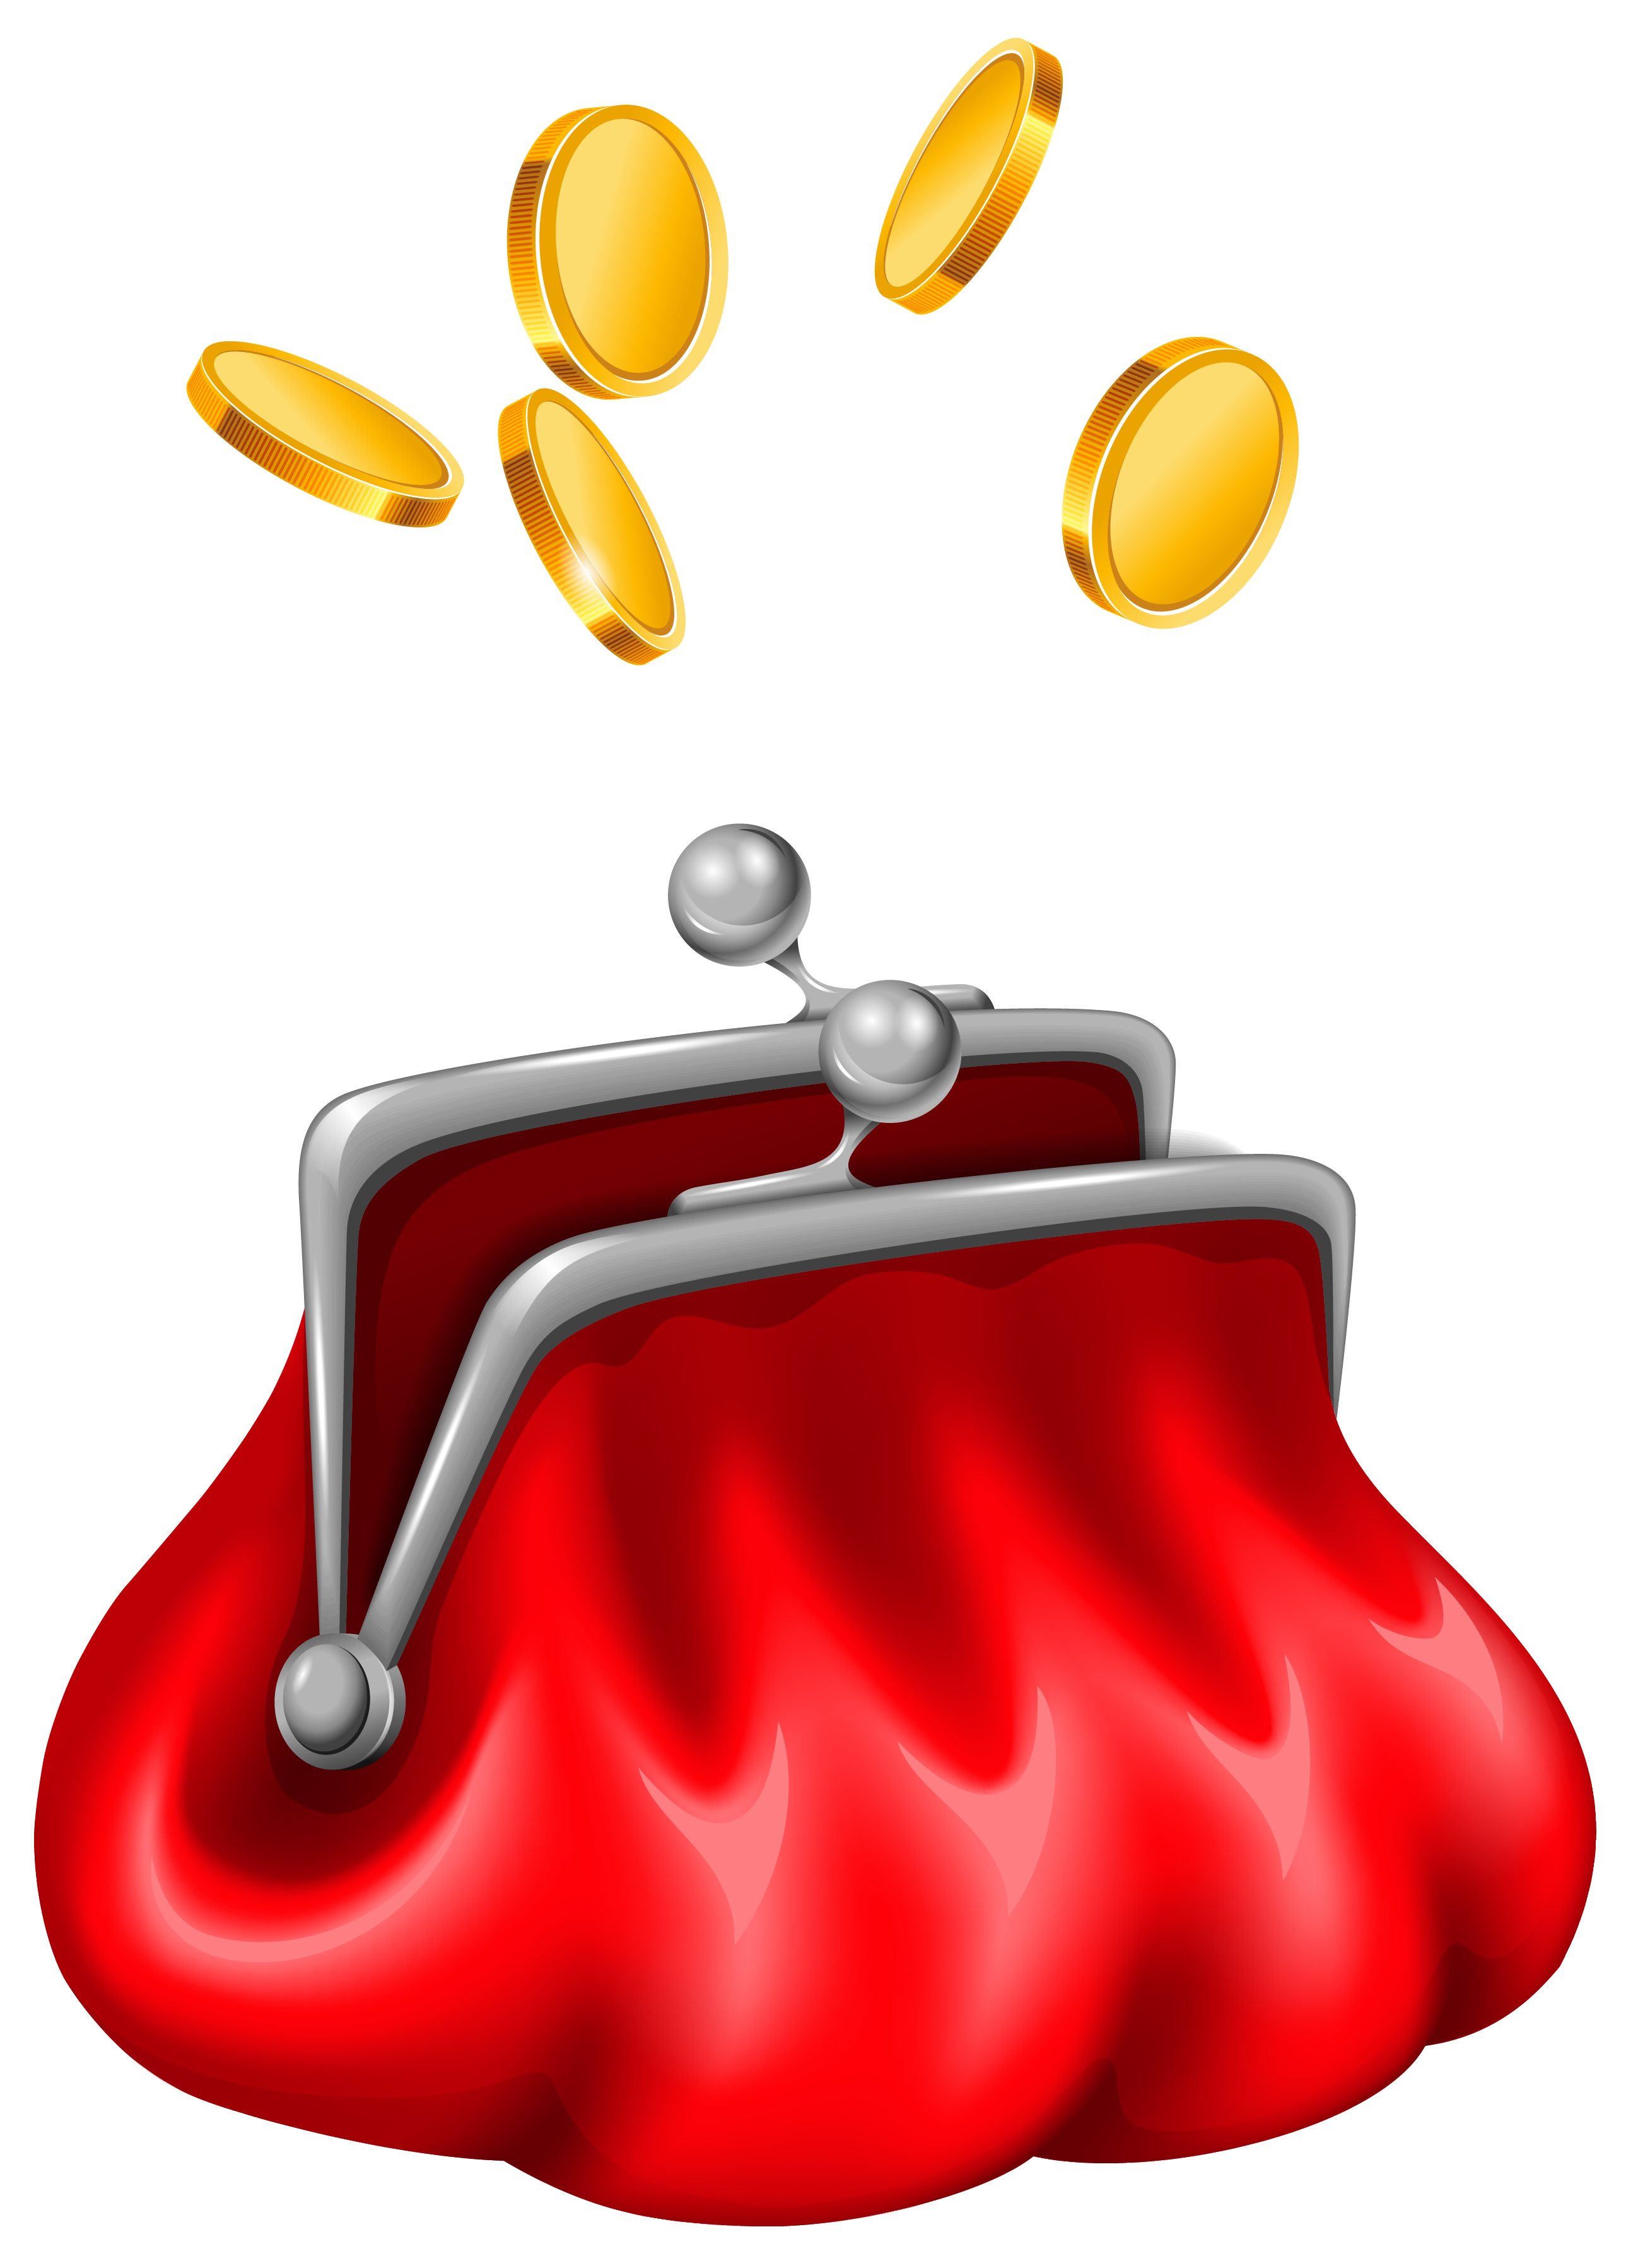 Purse with Coins Clipart